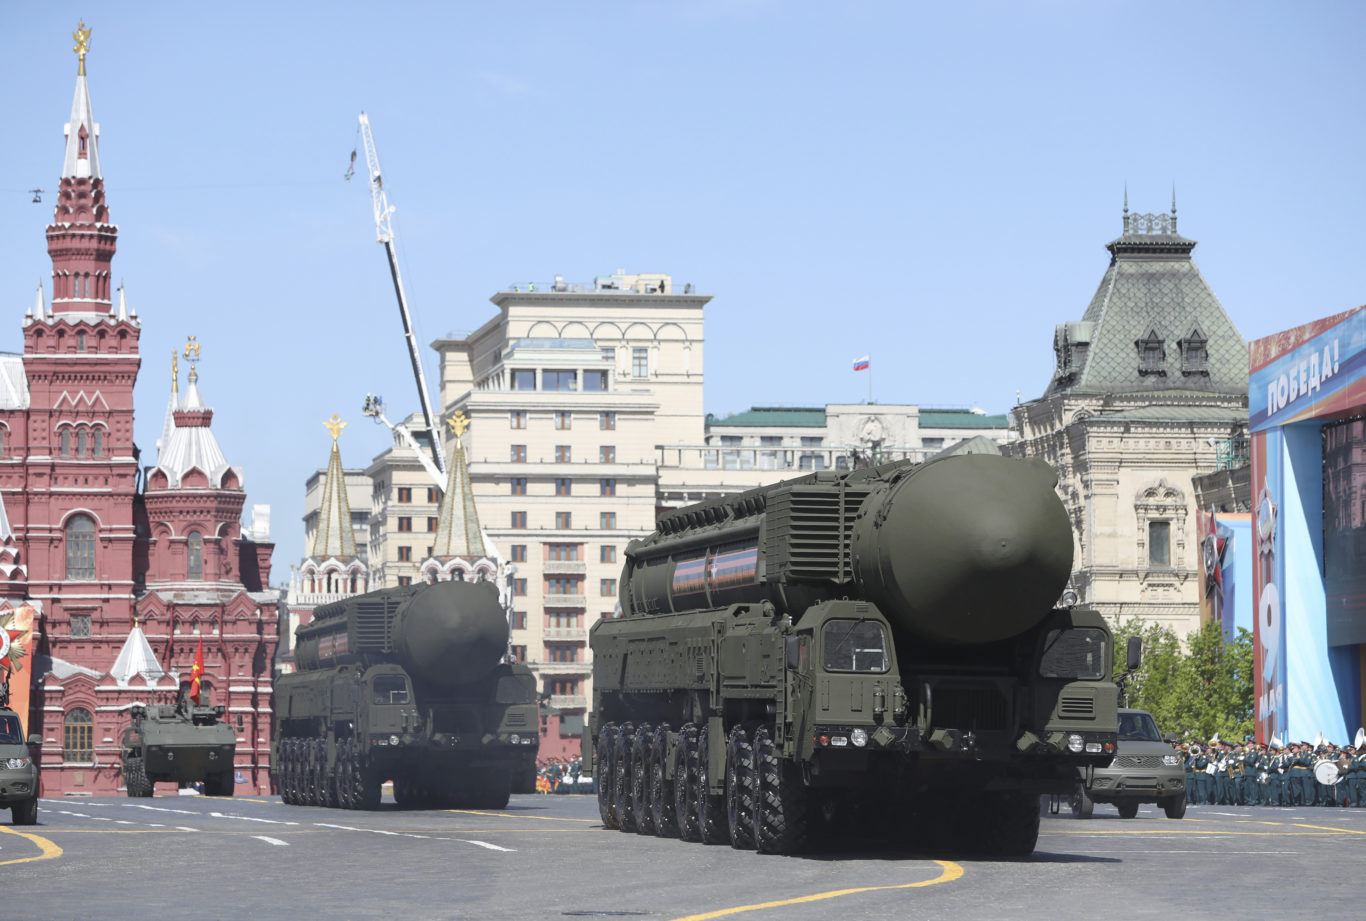 Yars strategic missiles were among some of the more up-to-date military hardware on display (AP)